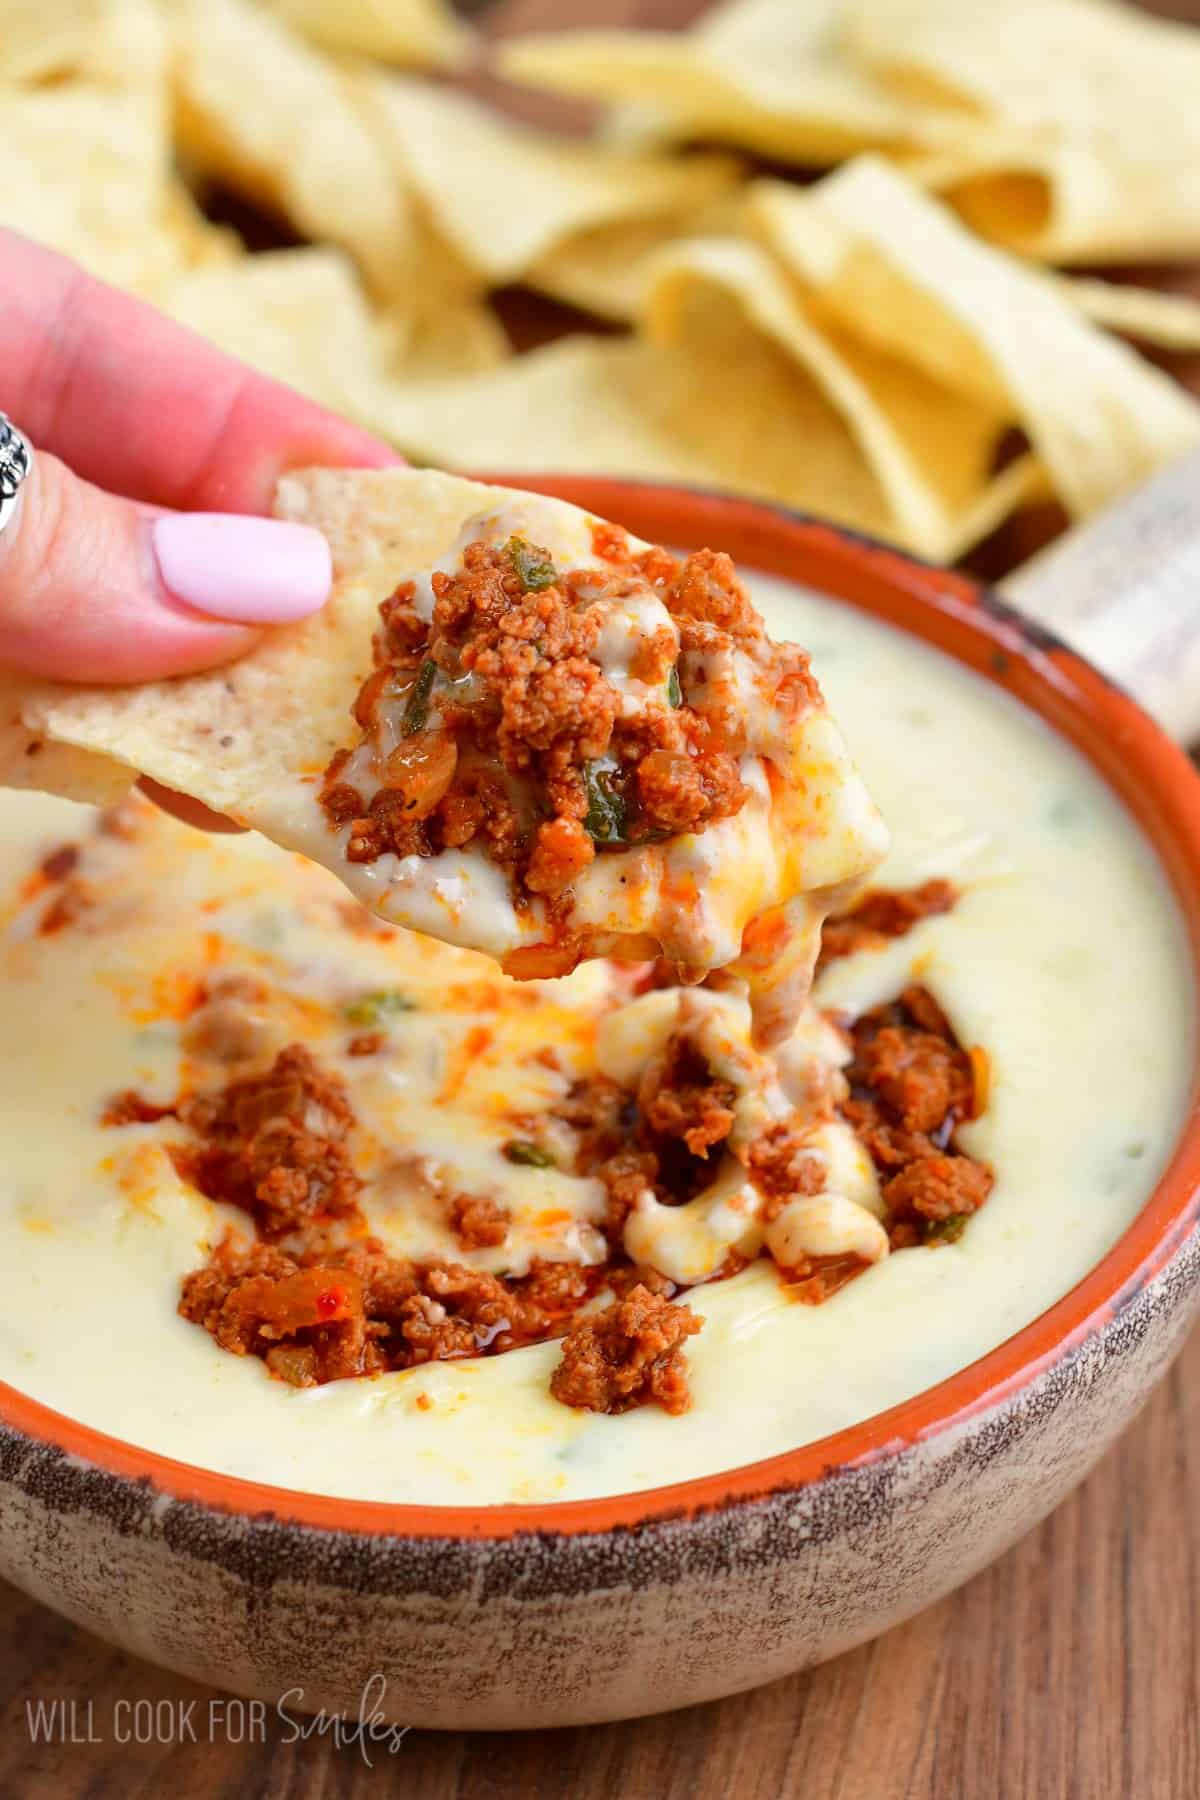 holding some queso dip and chorizo on a tortilla chip.